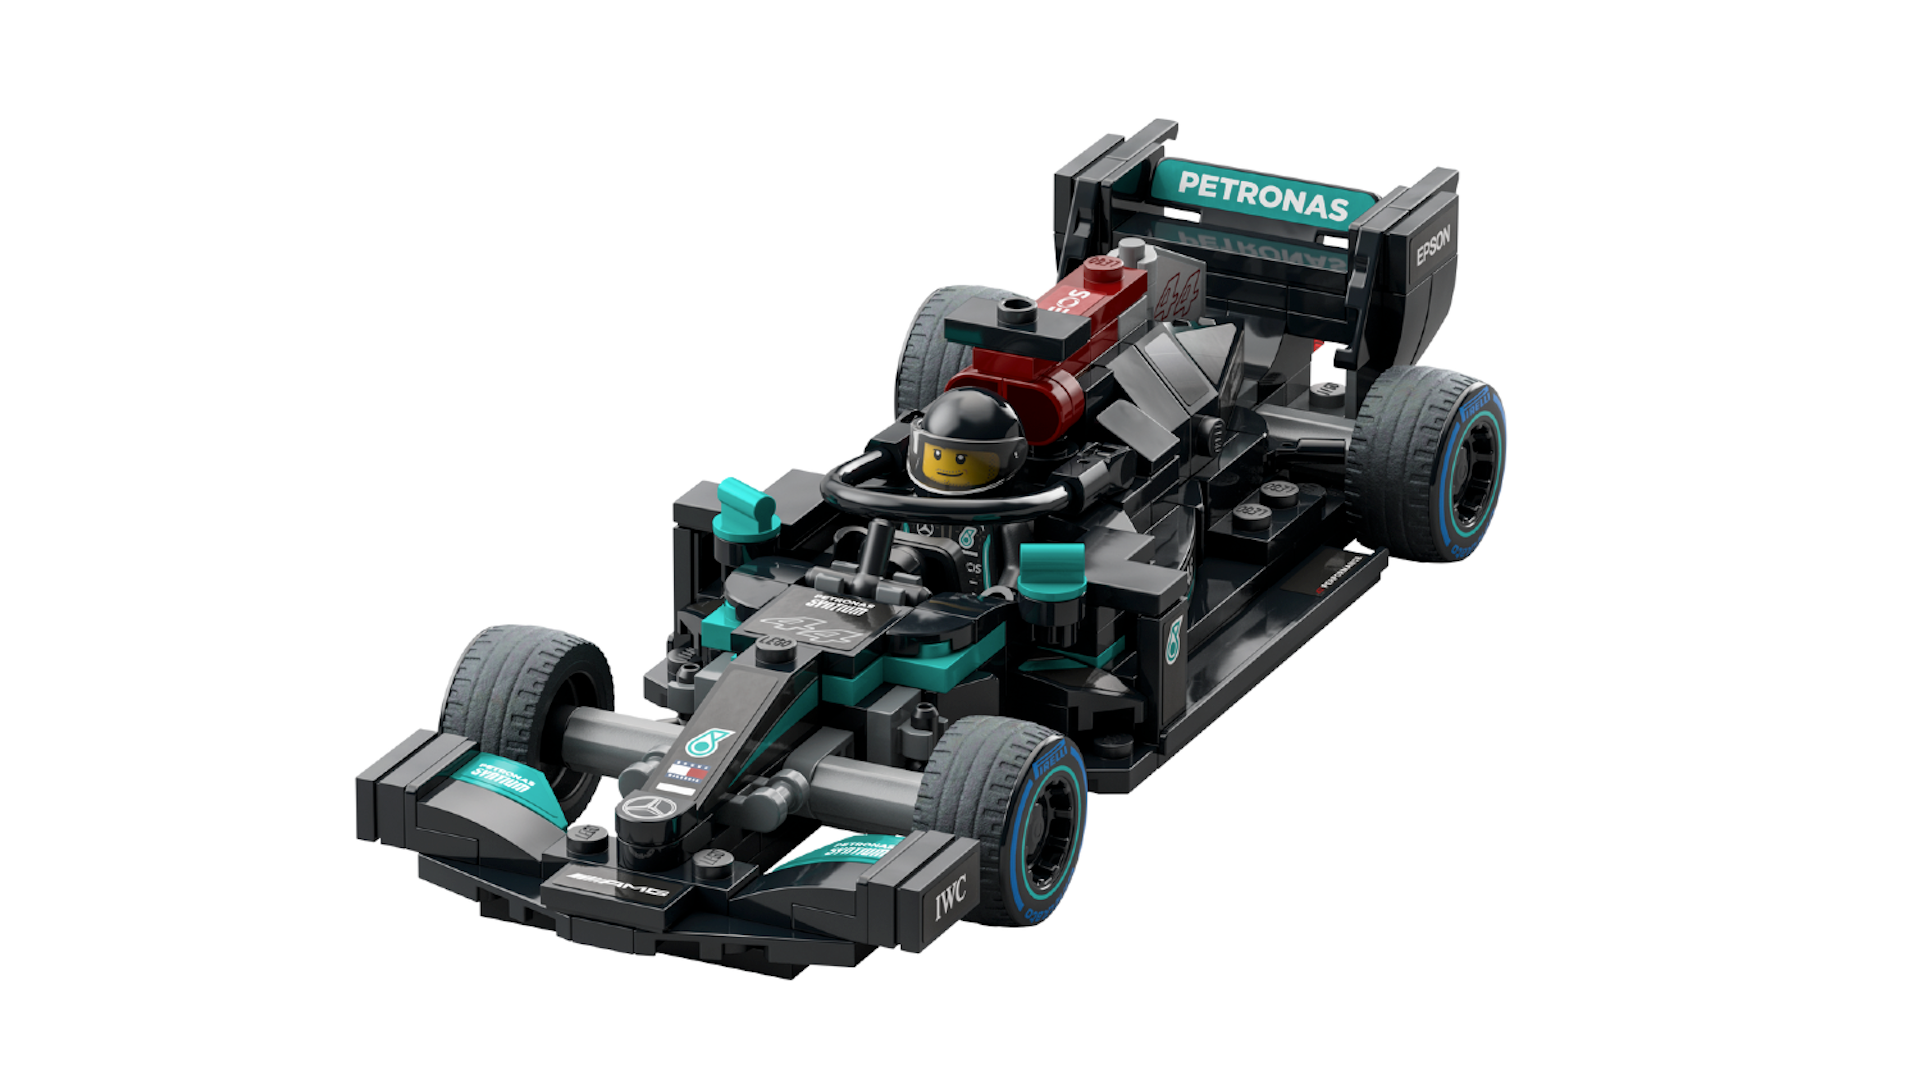 Lewis Hamilton’s 2021 Mercedes-AMG F1 Car Is Now Available As a Lego Set